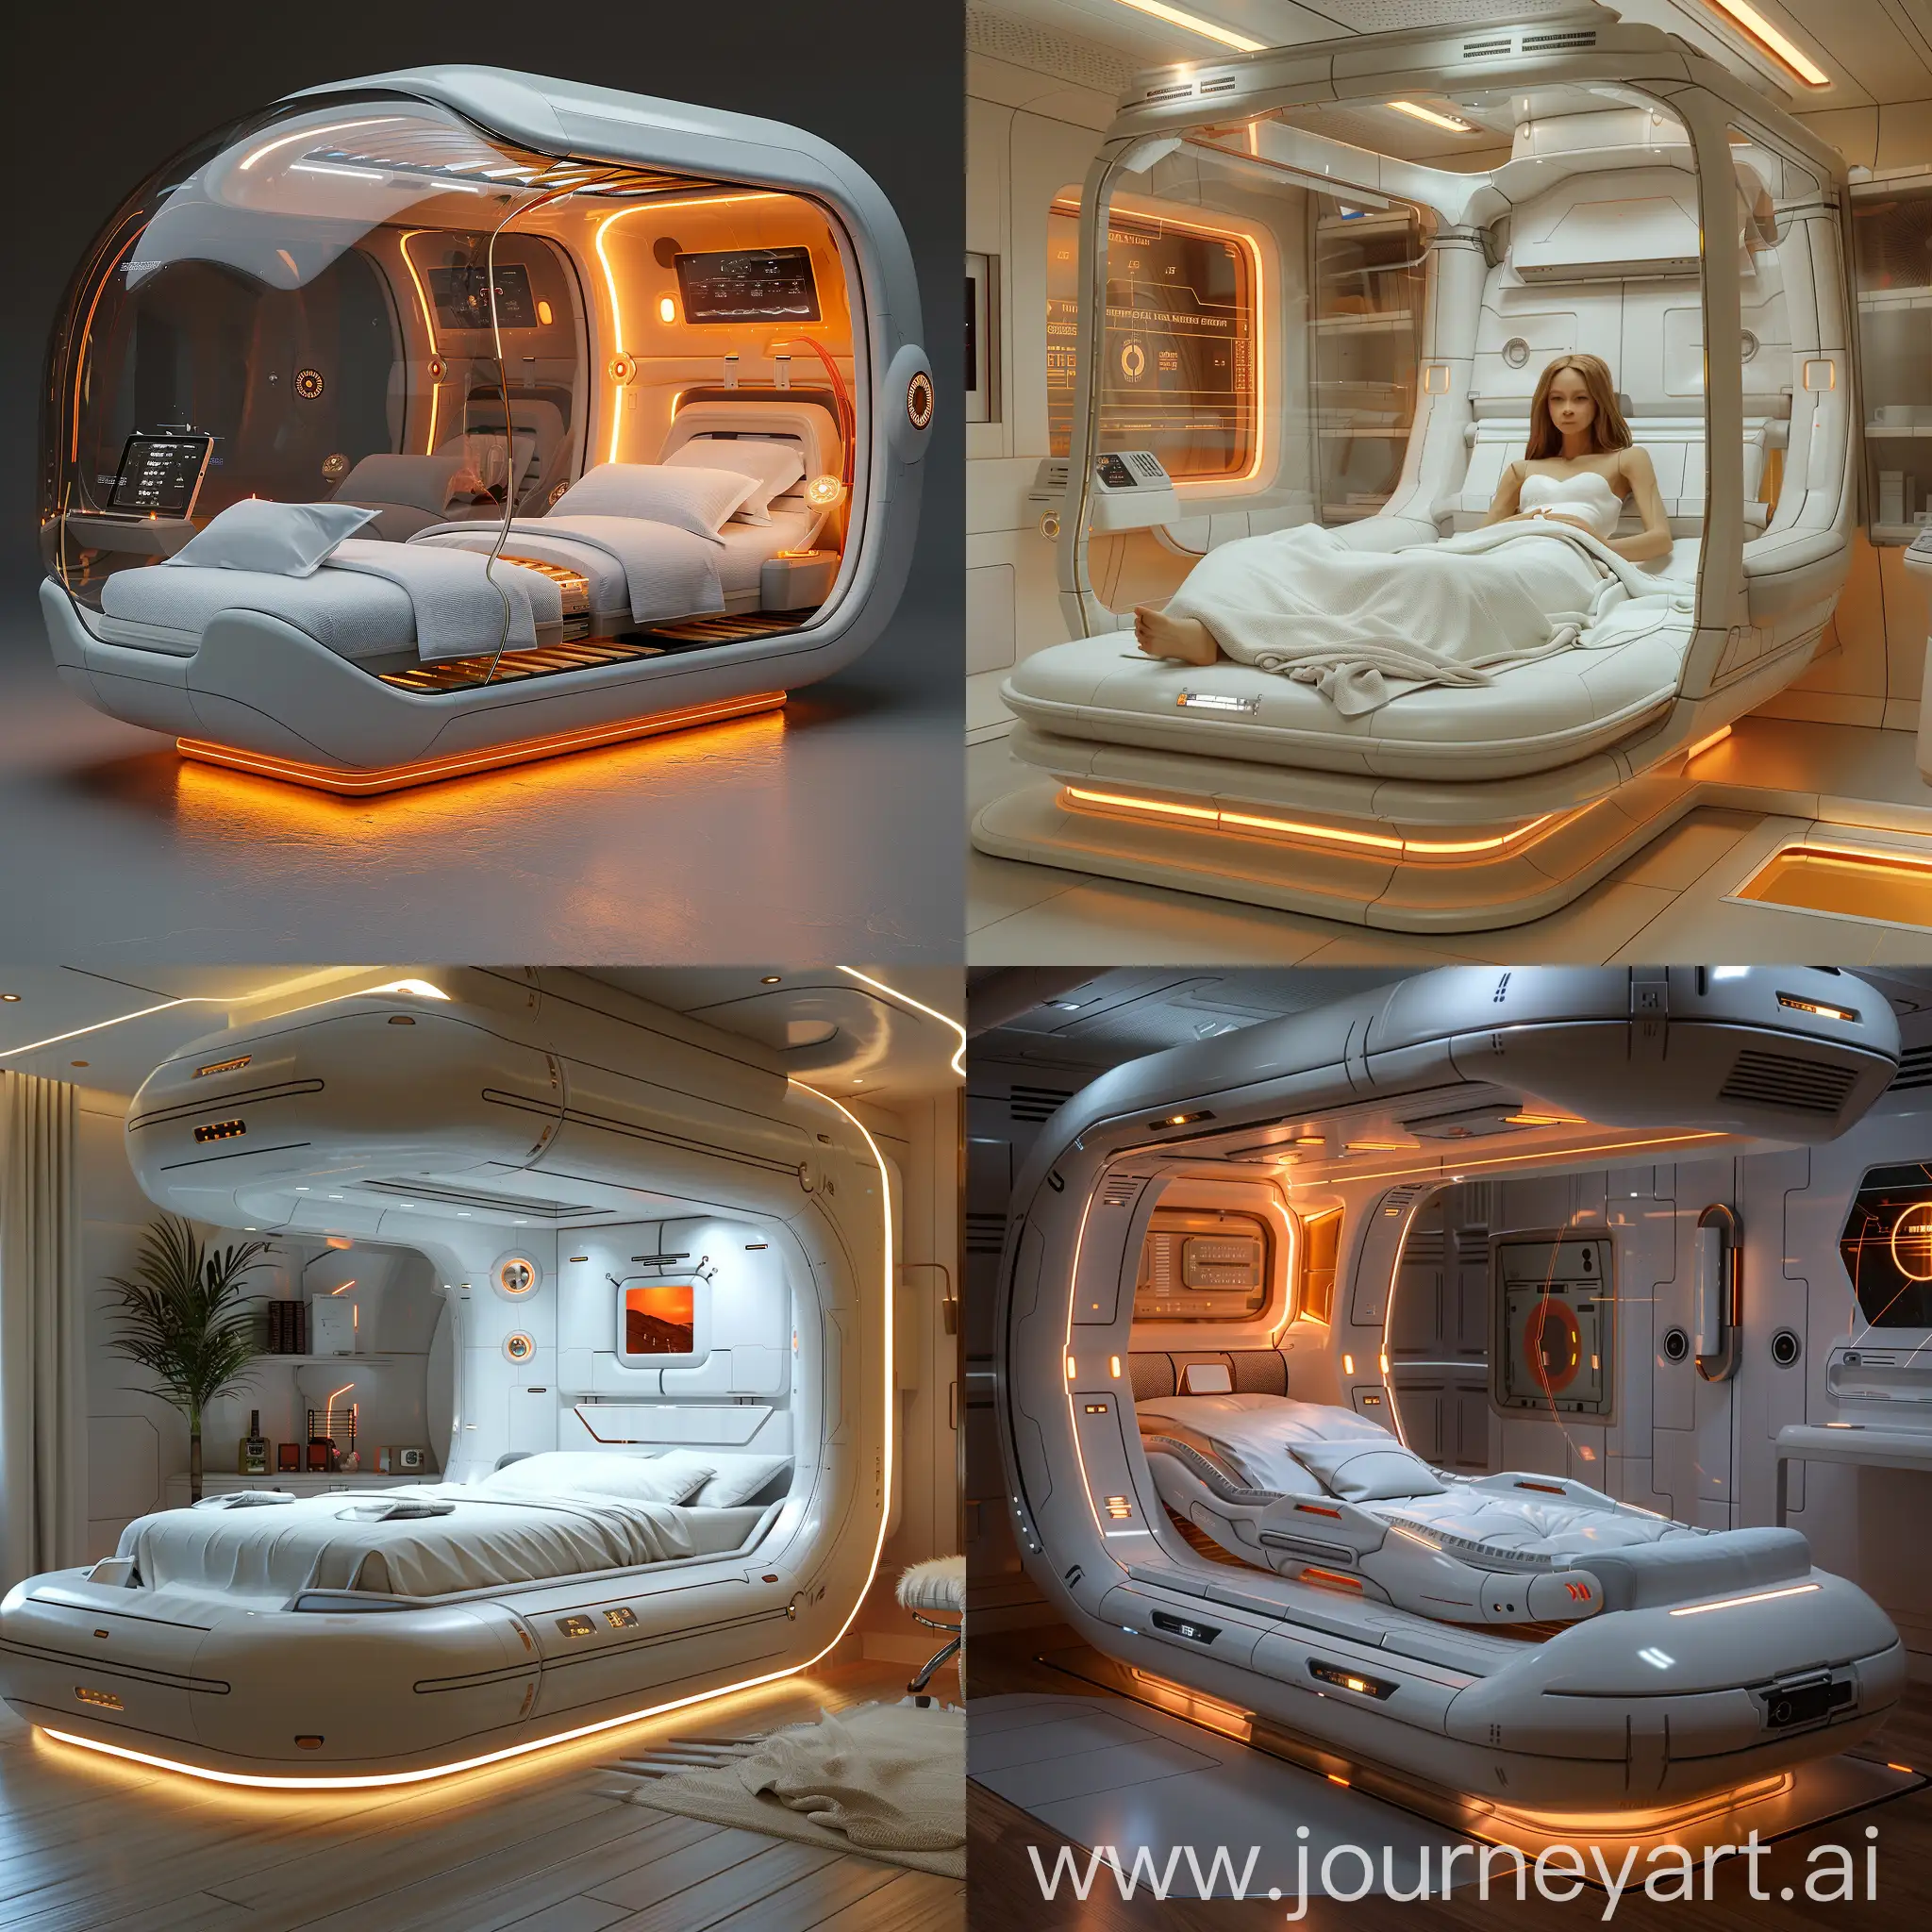 Futuristic-HighTech-Bed-with-Adjustable-Firmness-and-Climate-Control